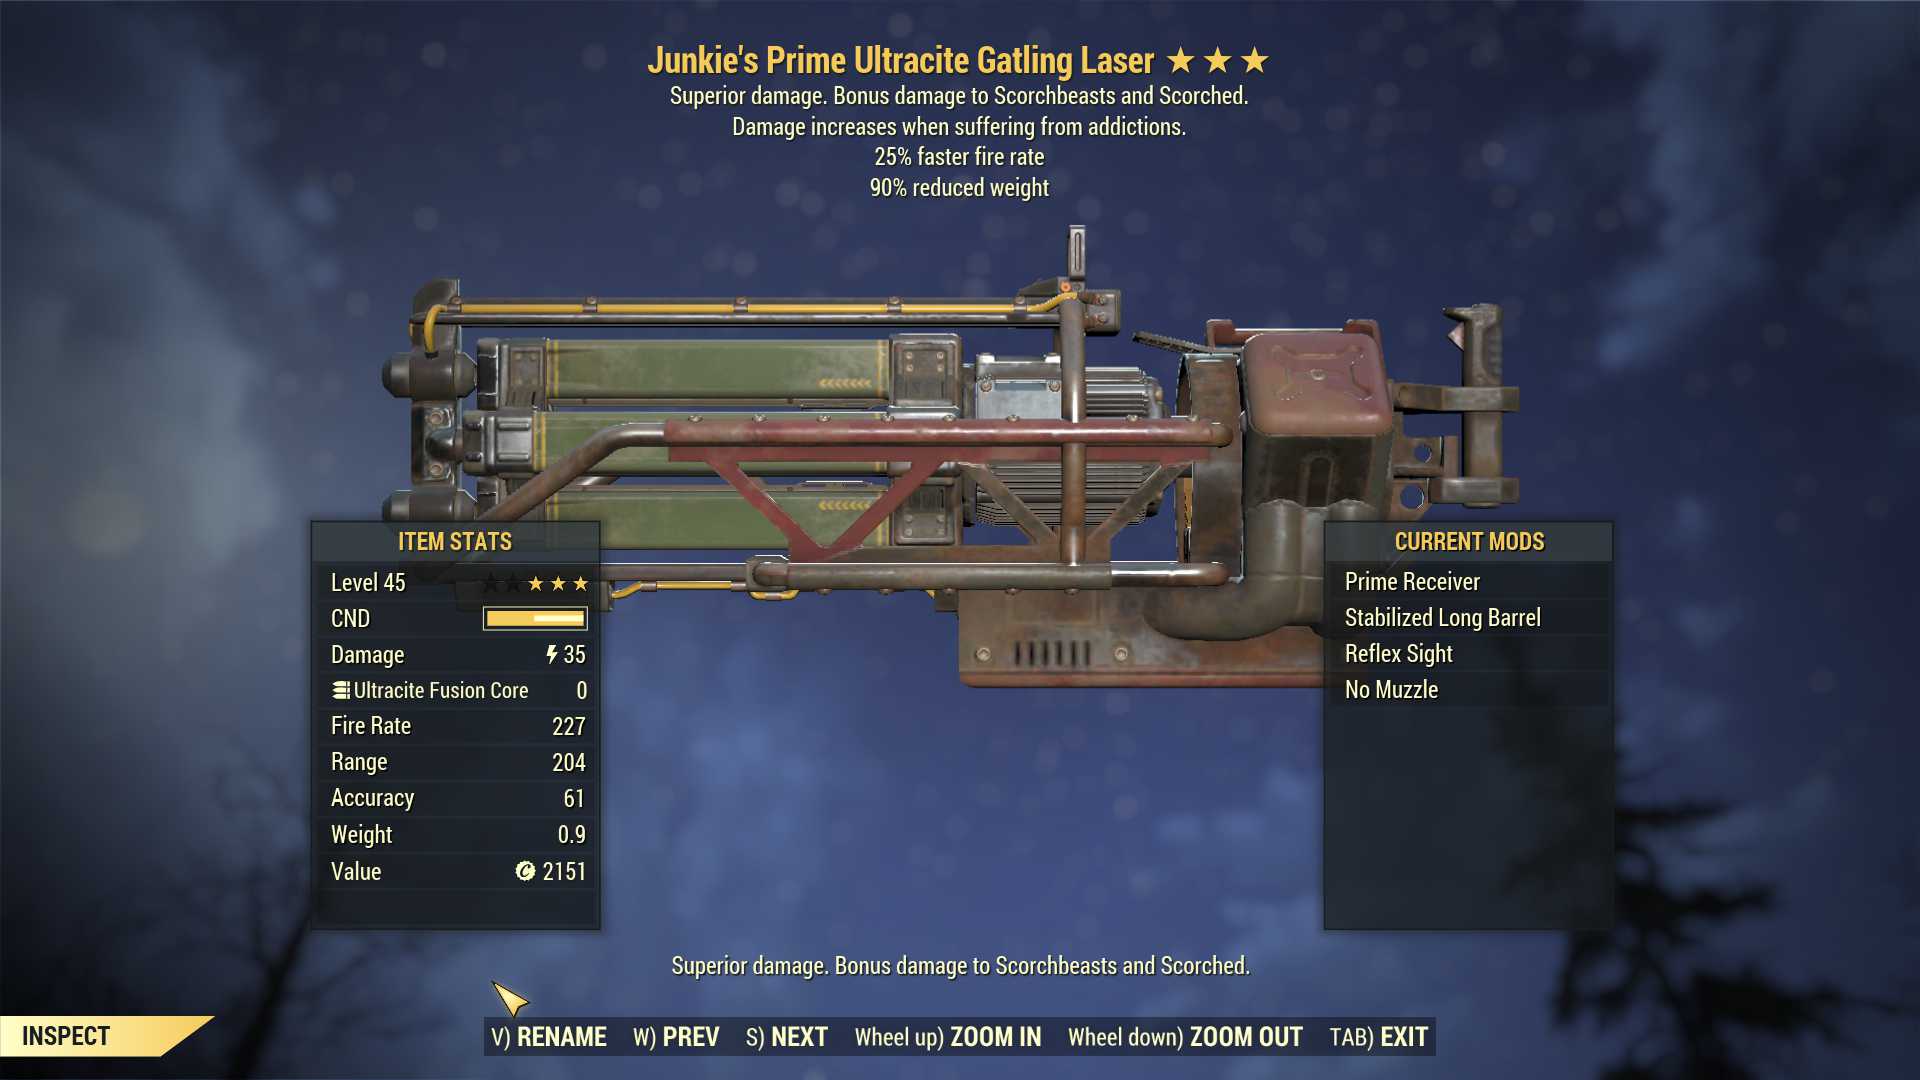 Junkie's Ultracite Gatling Laser (25% faster fire rate, 90% reduced weight)